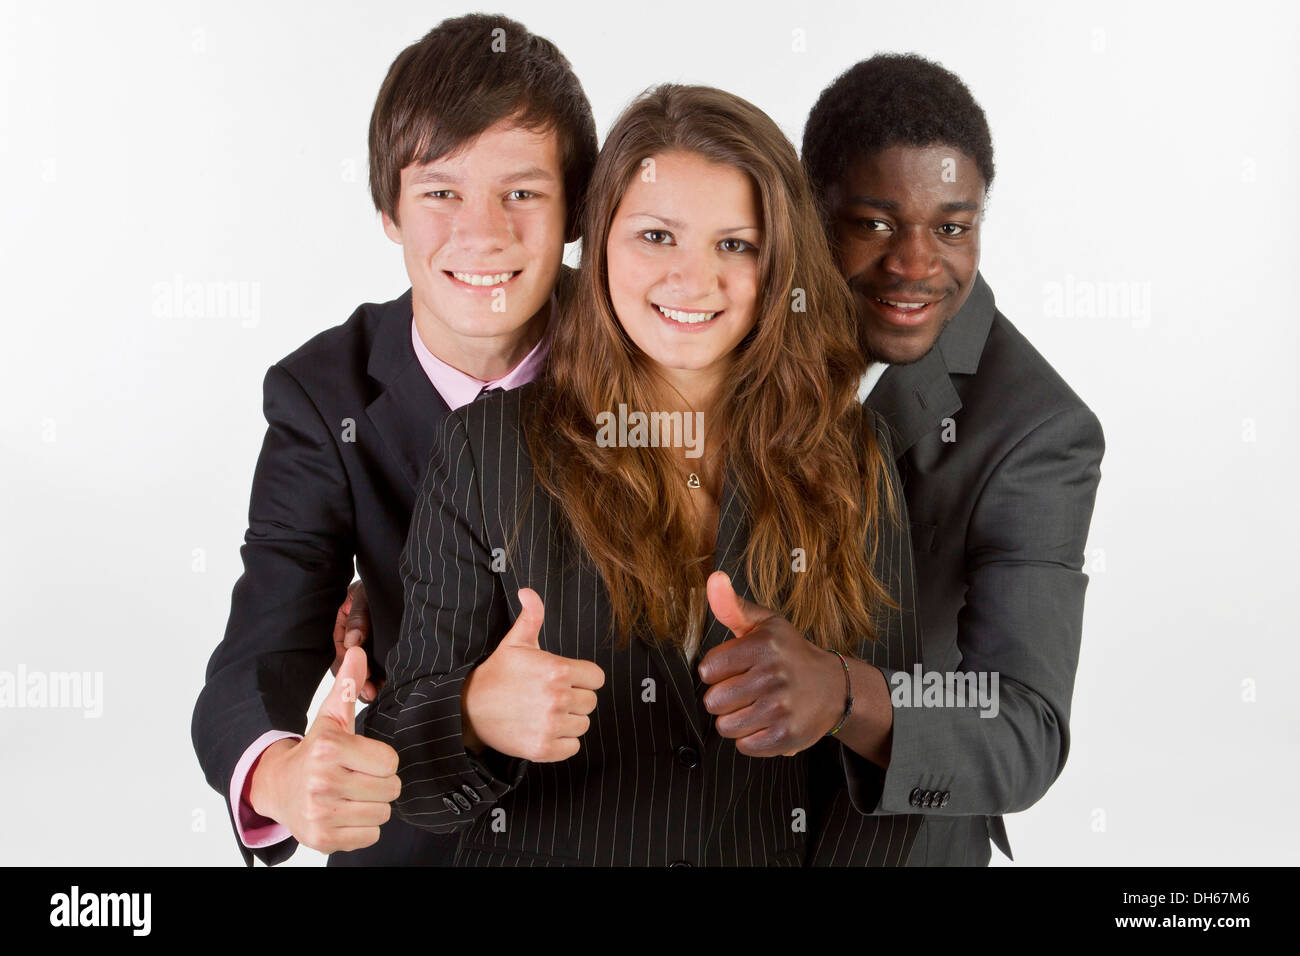 Three young people with different skin colors giving a thumbs up Stock Photo